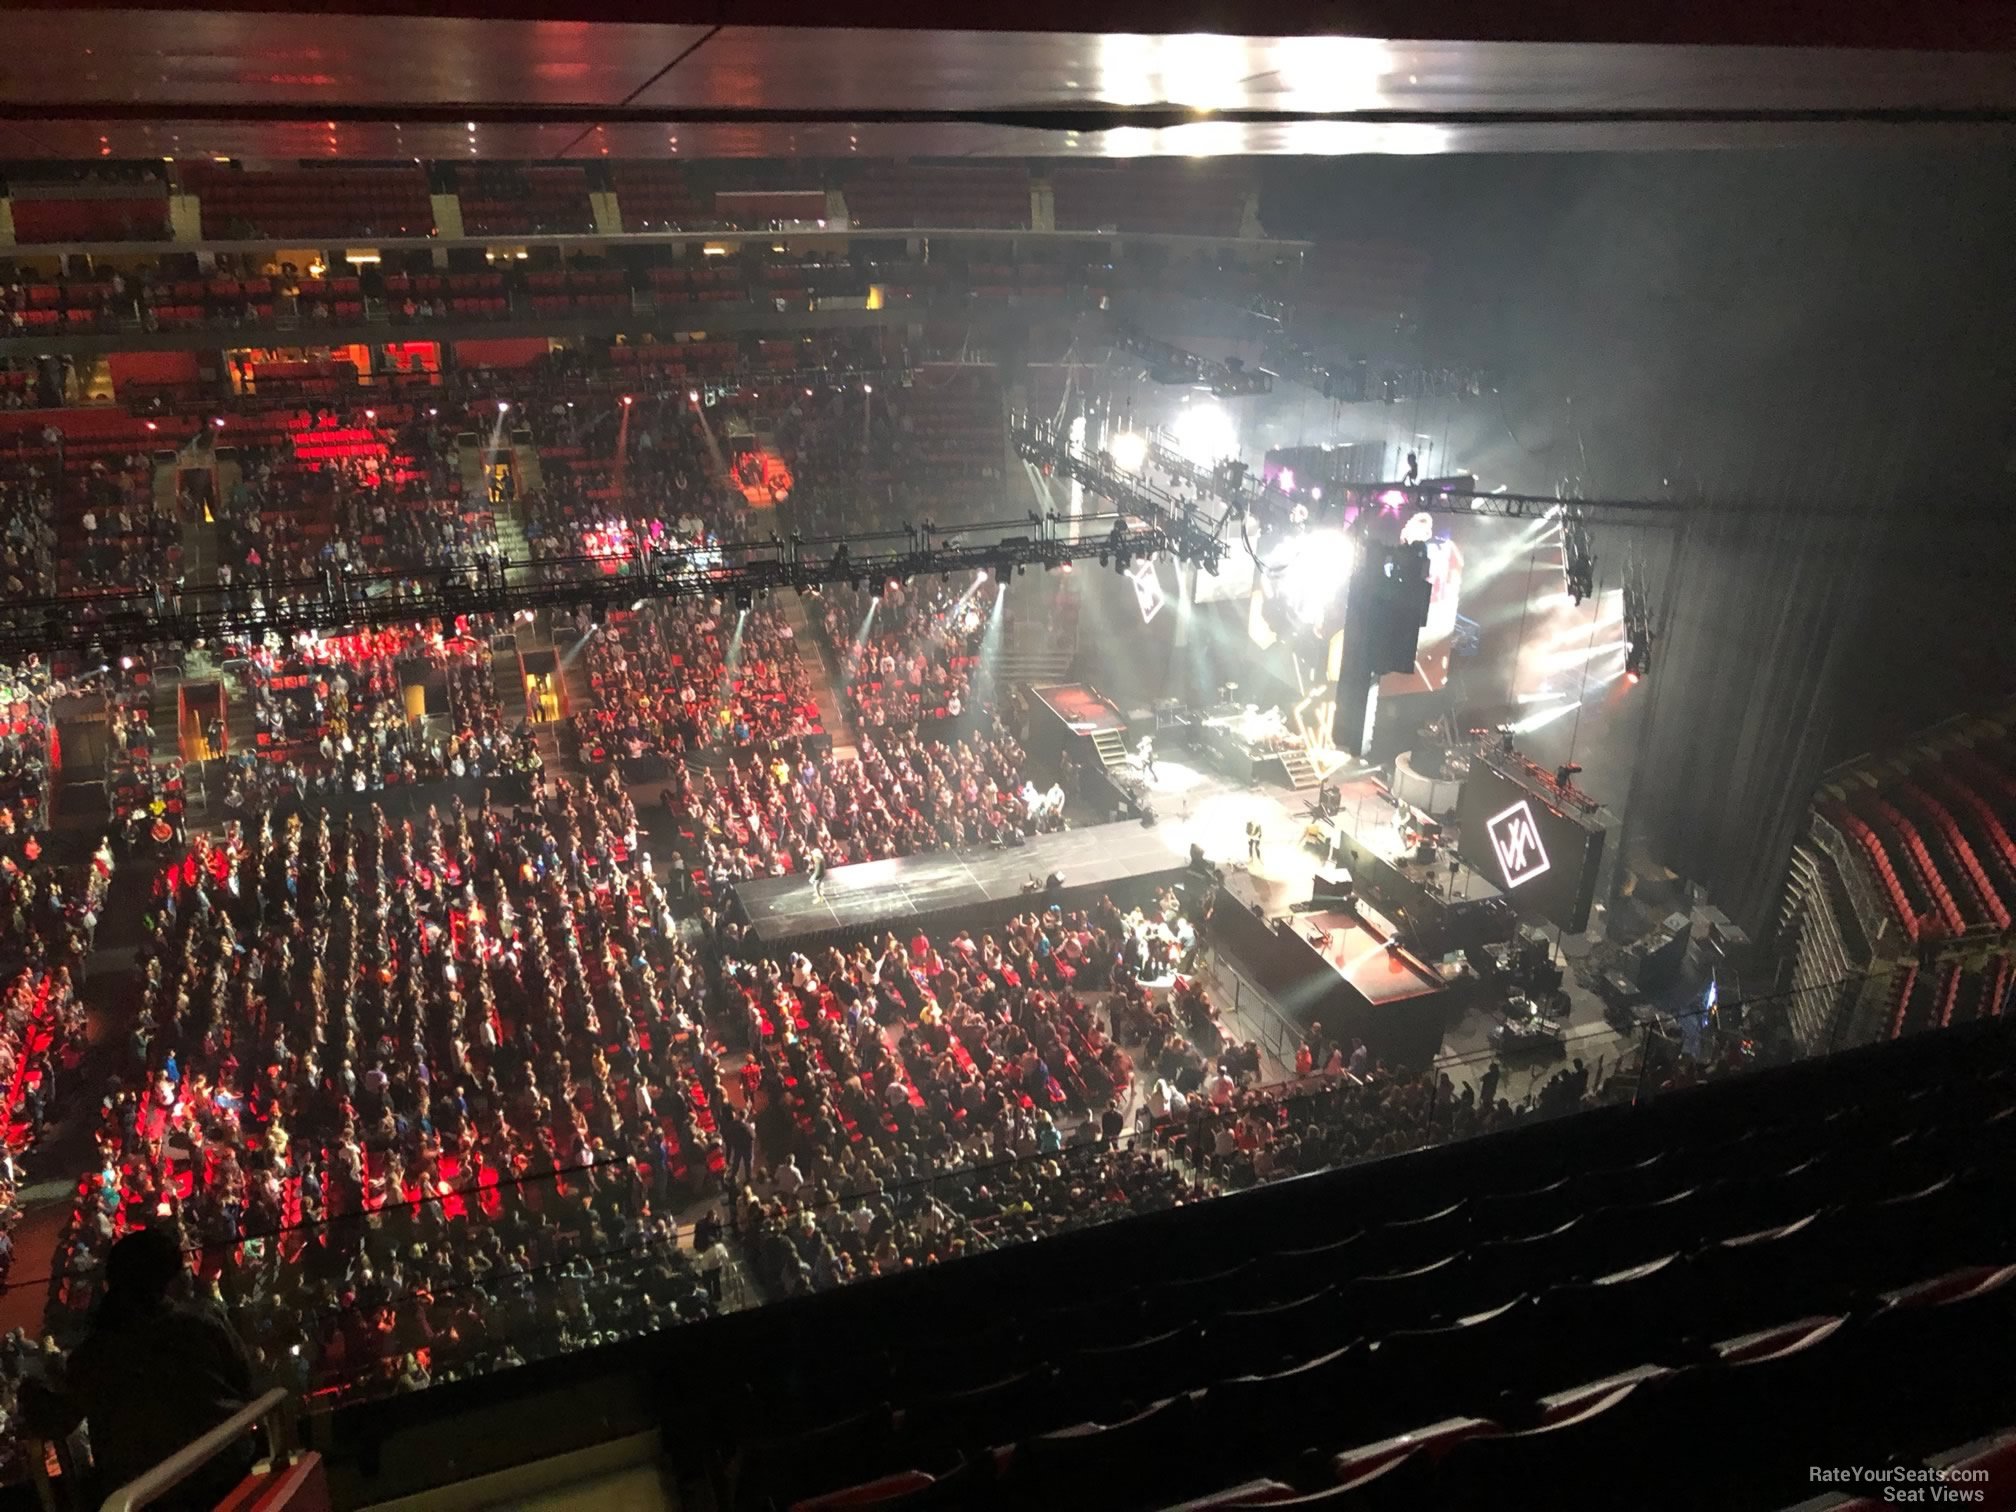 section 212, row 7 seat view  for concert - little caesars arena